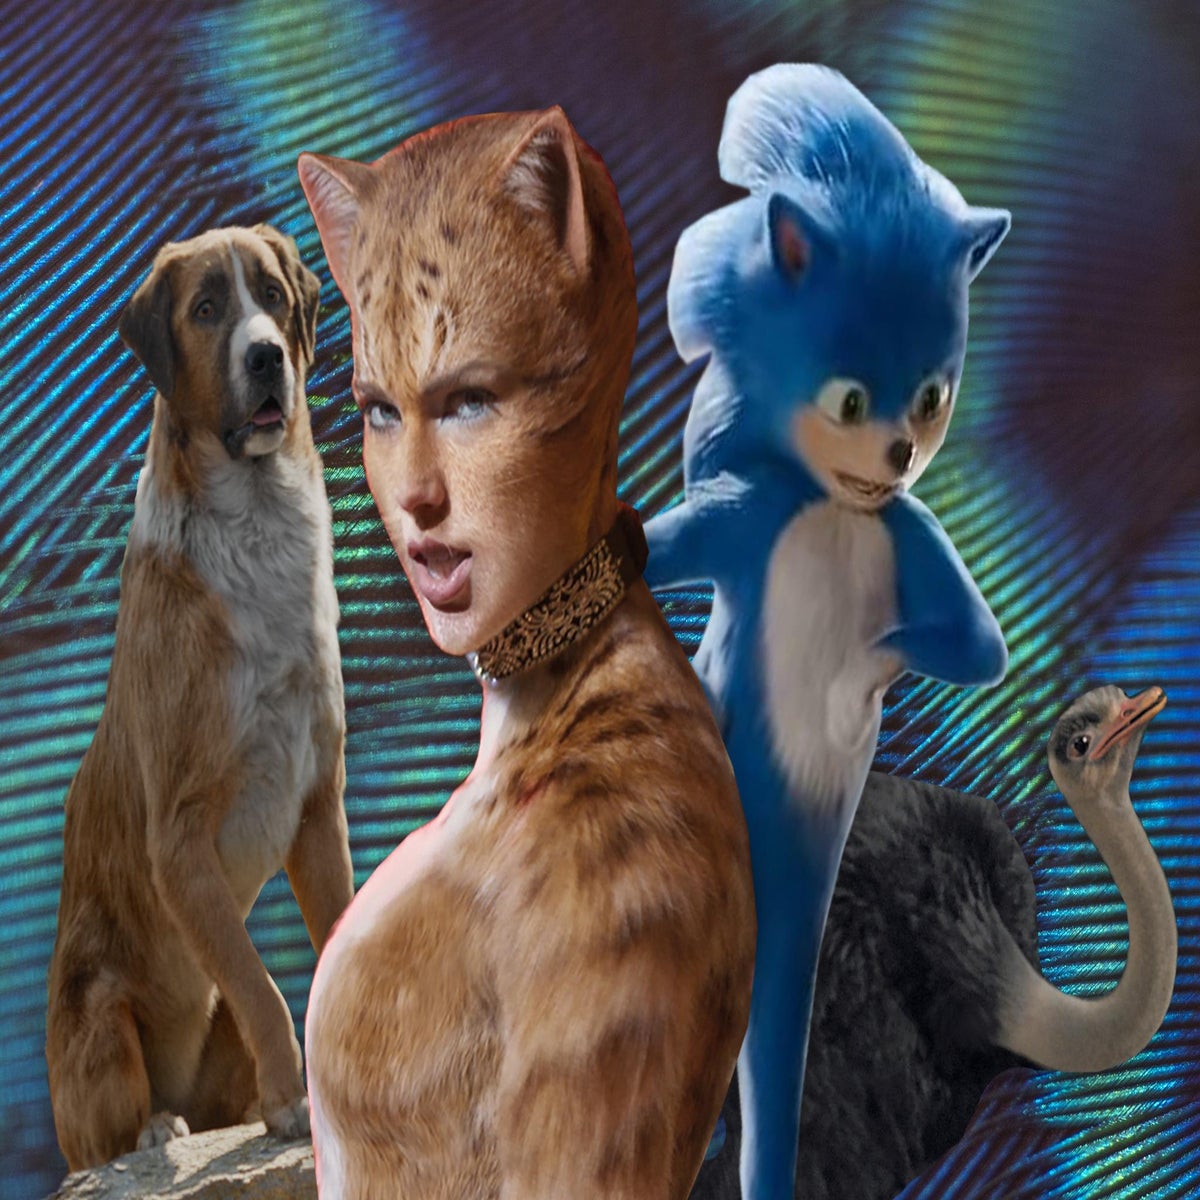 Does The 'Cats' Film Use 'Digital Fur Technology' — Or Animation?